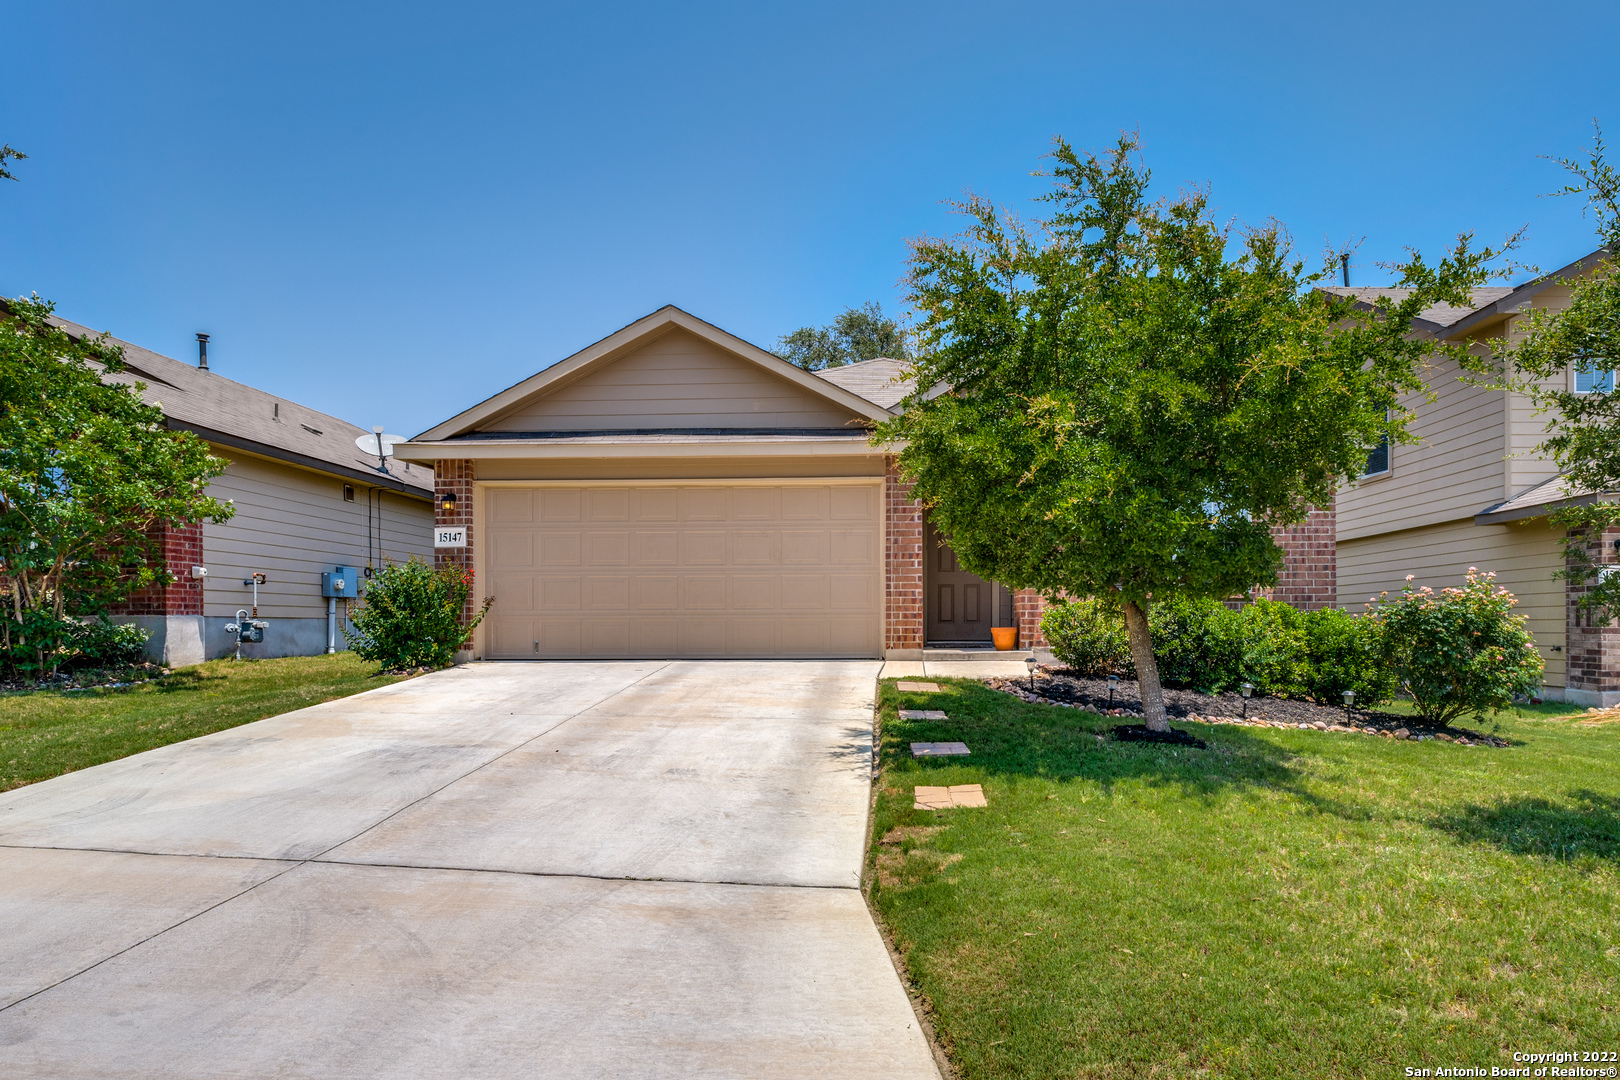 Gorgeous one story home located in desirable area of Redbird Ranch. Home features an amazing layout. Great open floor plan- kitchen opens to living room area. Master suite bedroom offers its own full bath plus two additional rooms. See your dream home TODAY! Open House May 28,2022